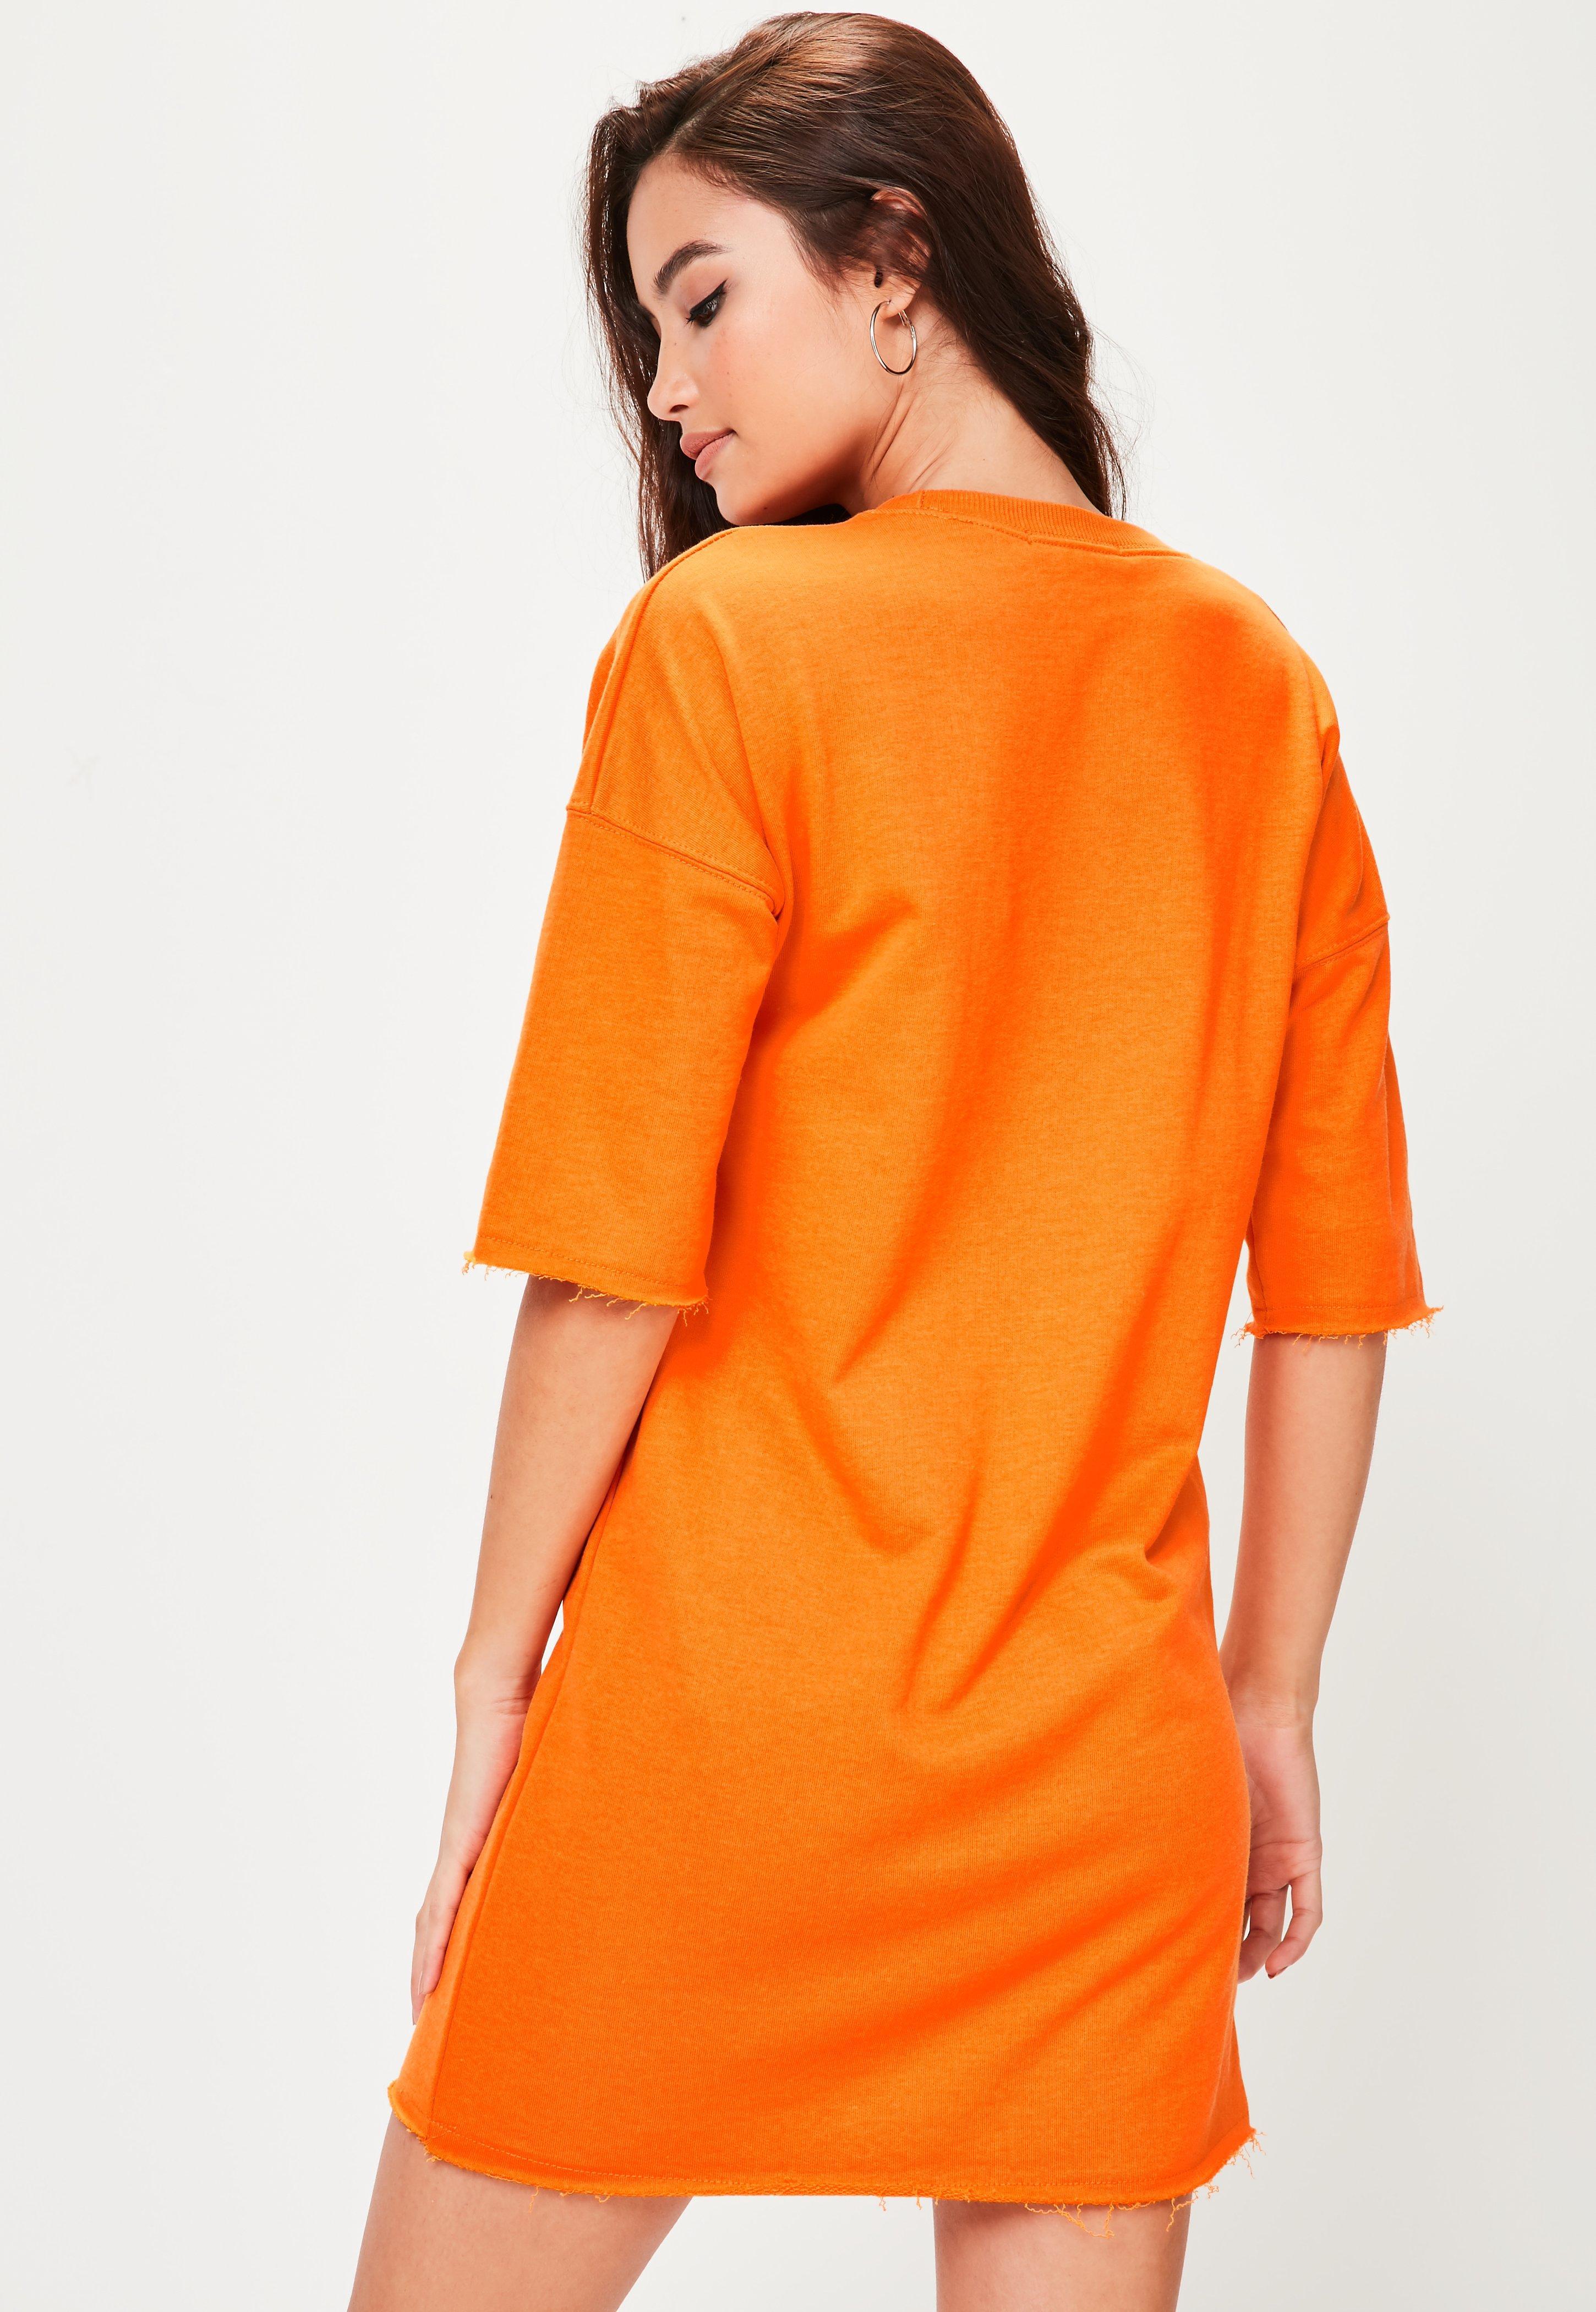 Movies Orange Dress With Sleeves Online Edenton Clothing For Women In Store 